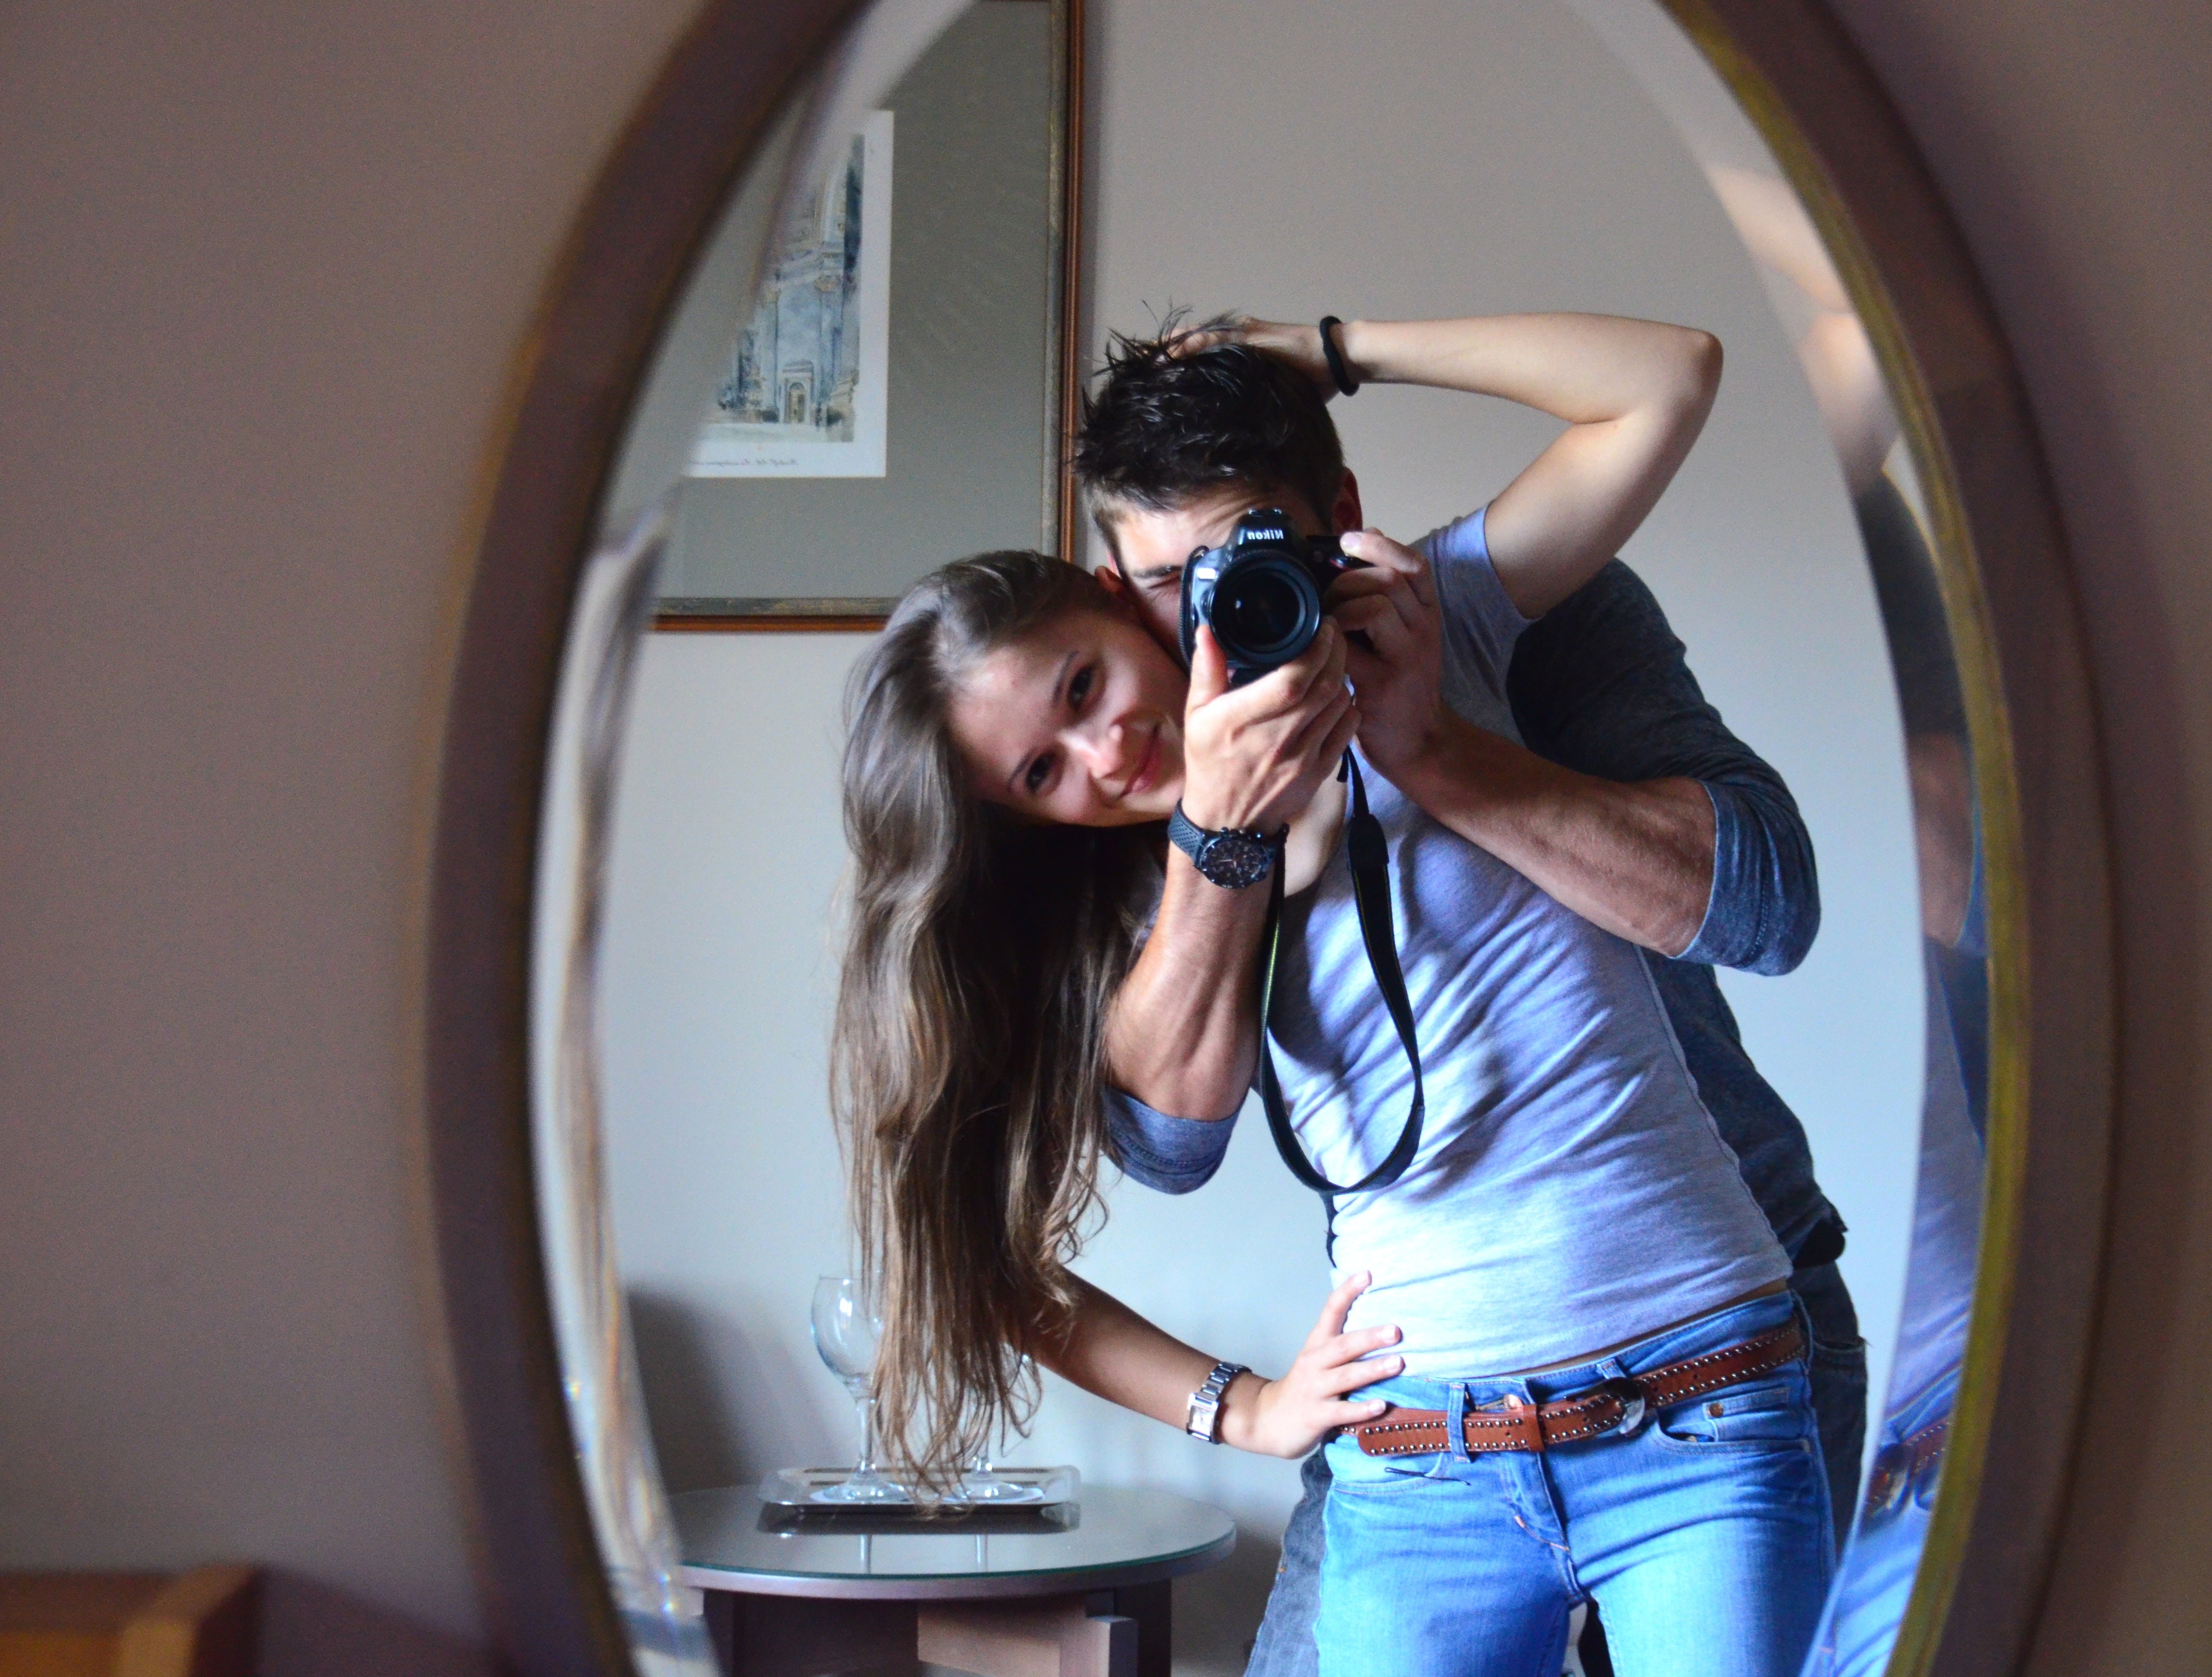 A couple takes a photo infront of a mirror. | Source: Pexels